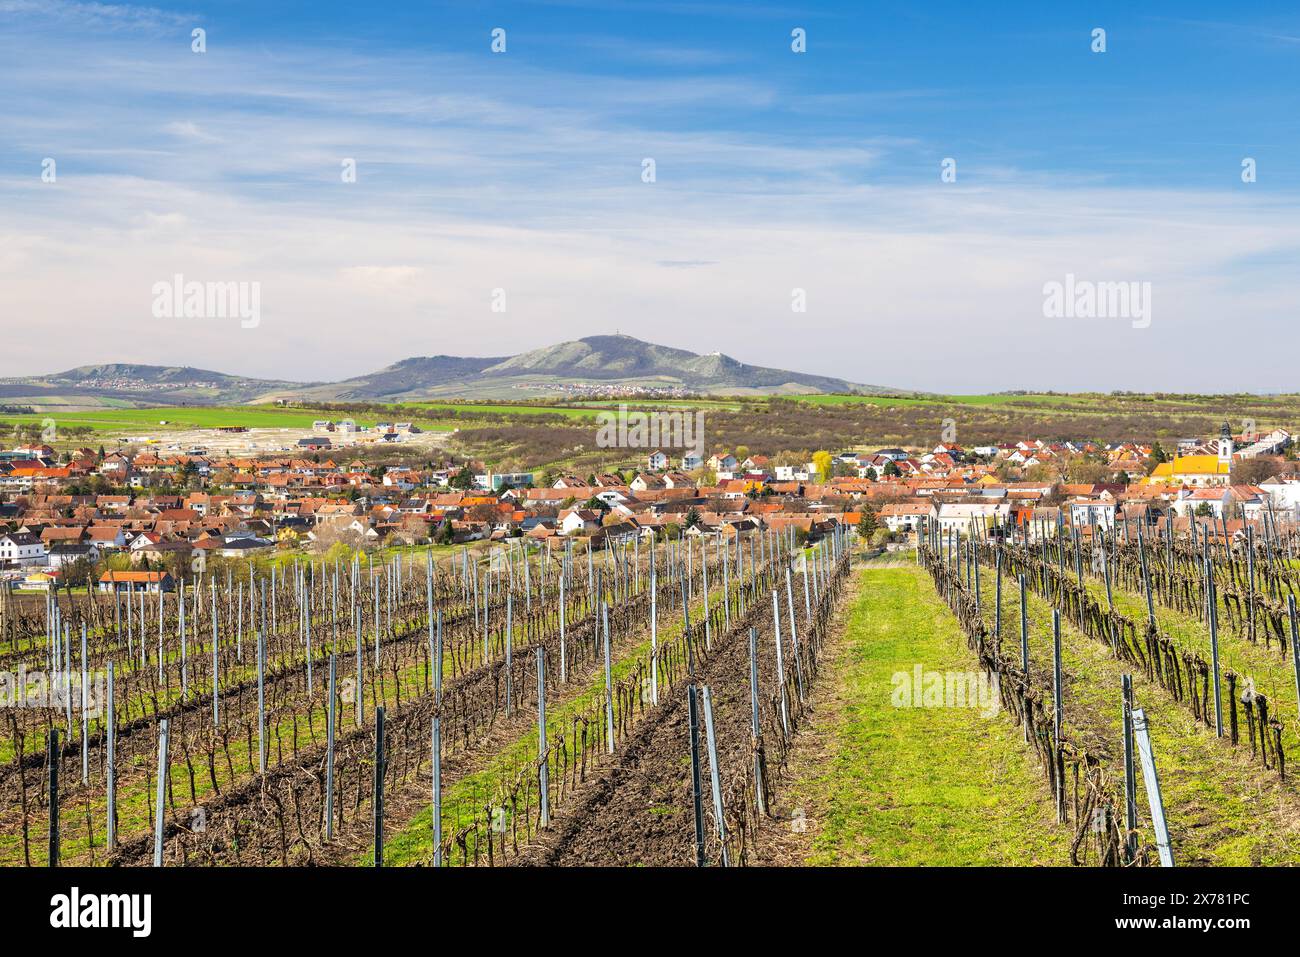 View of the picturesque wine region near Velke Pavlovice with mountains of The Palava landscape area in South Moravia, Czech Republic, Europe. Stock Photo